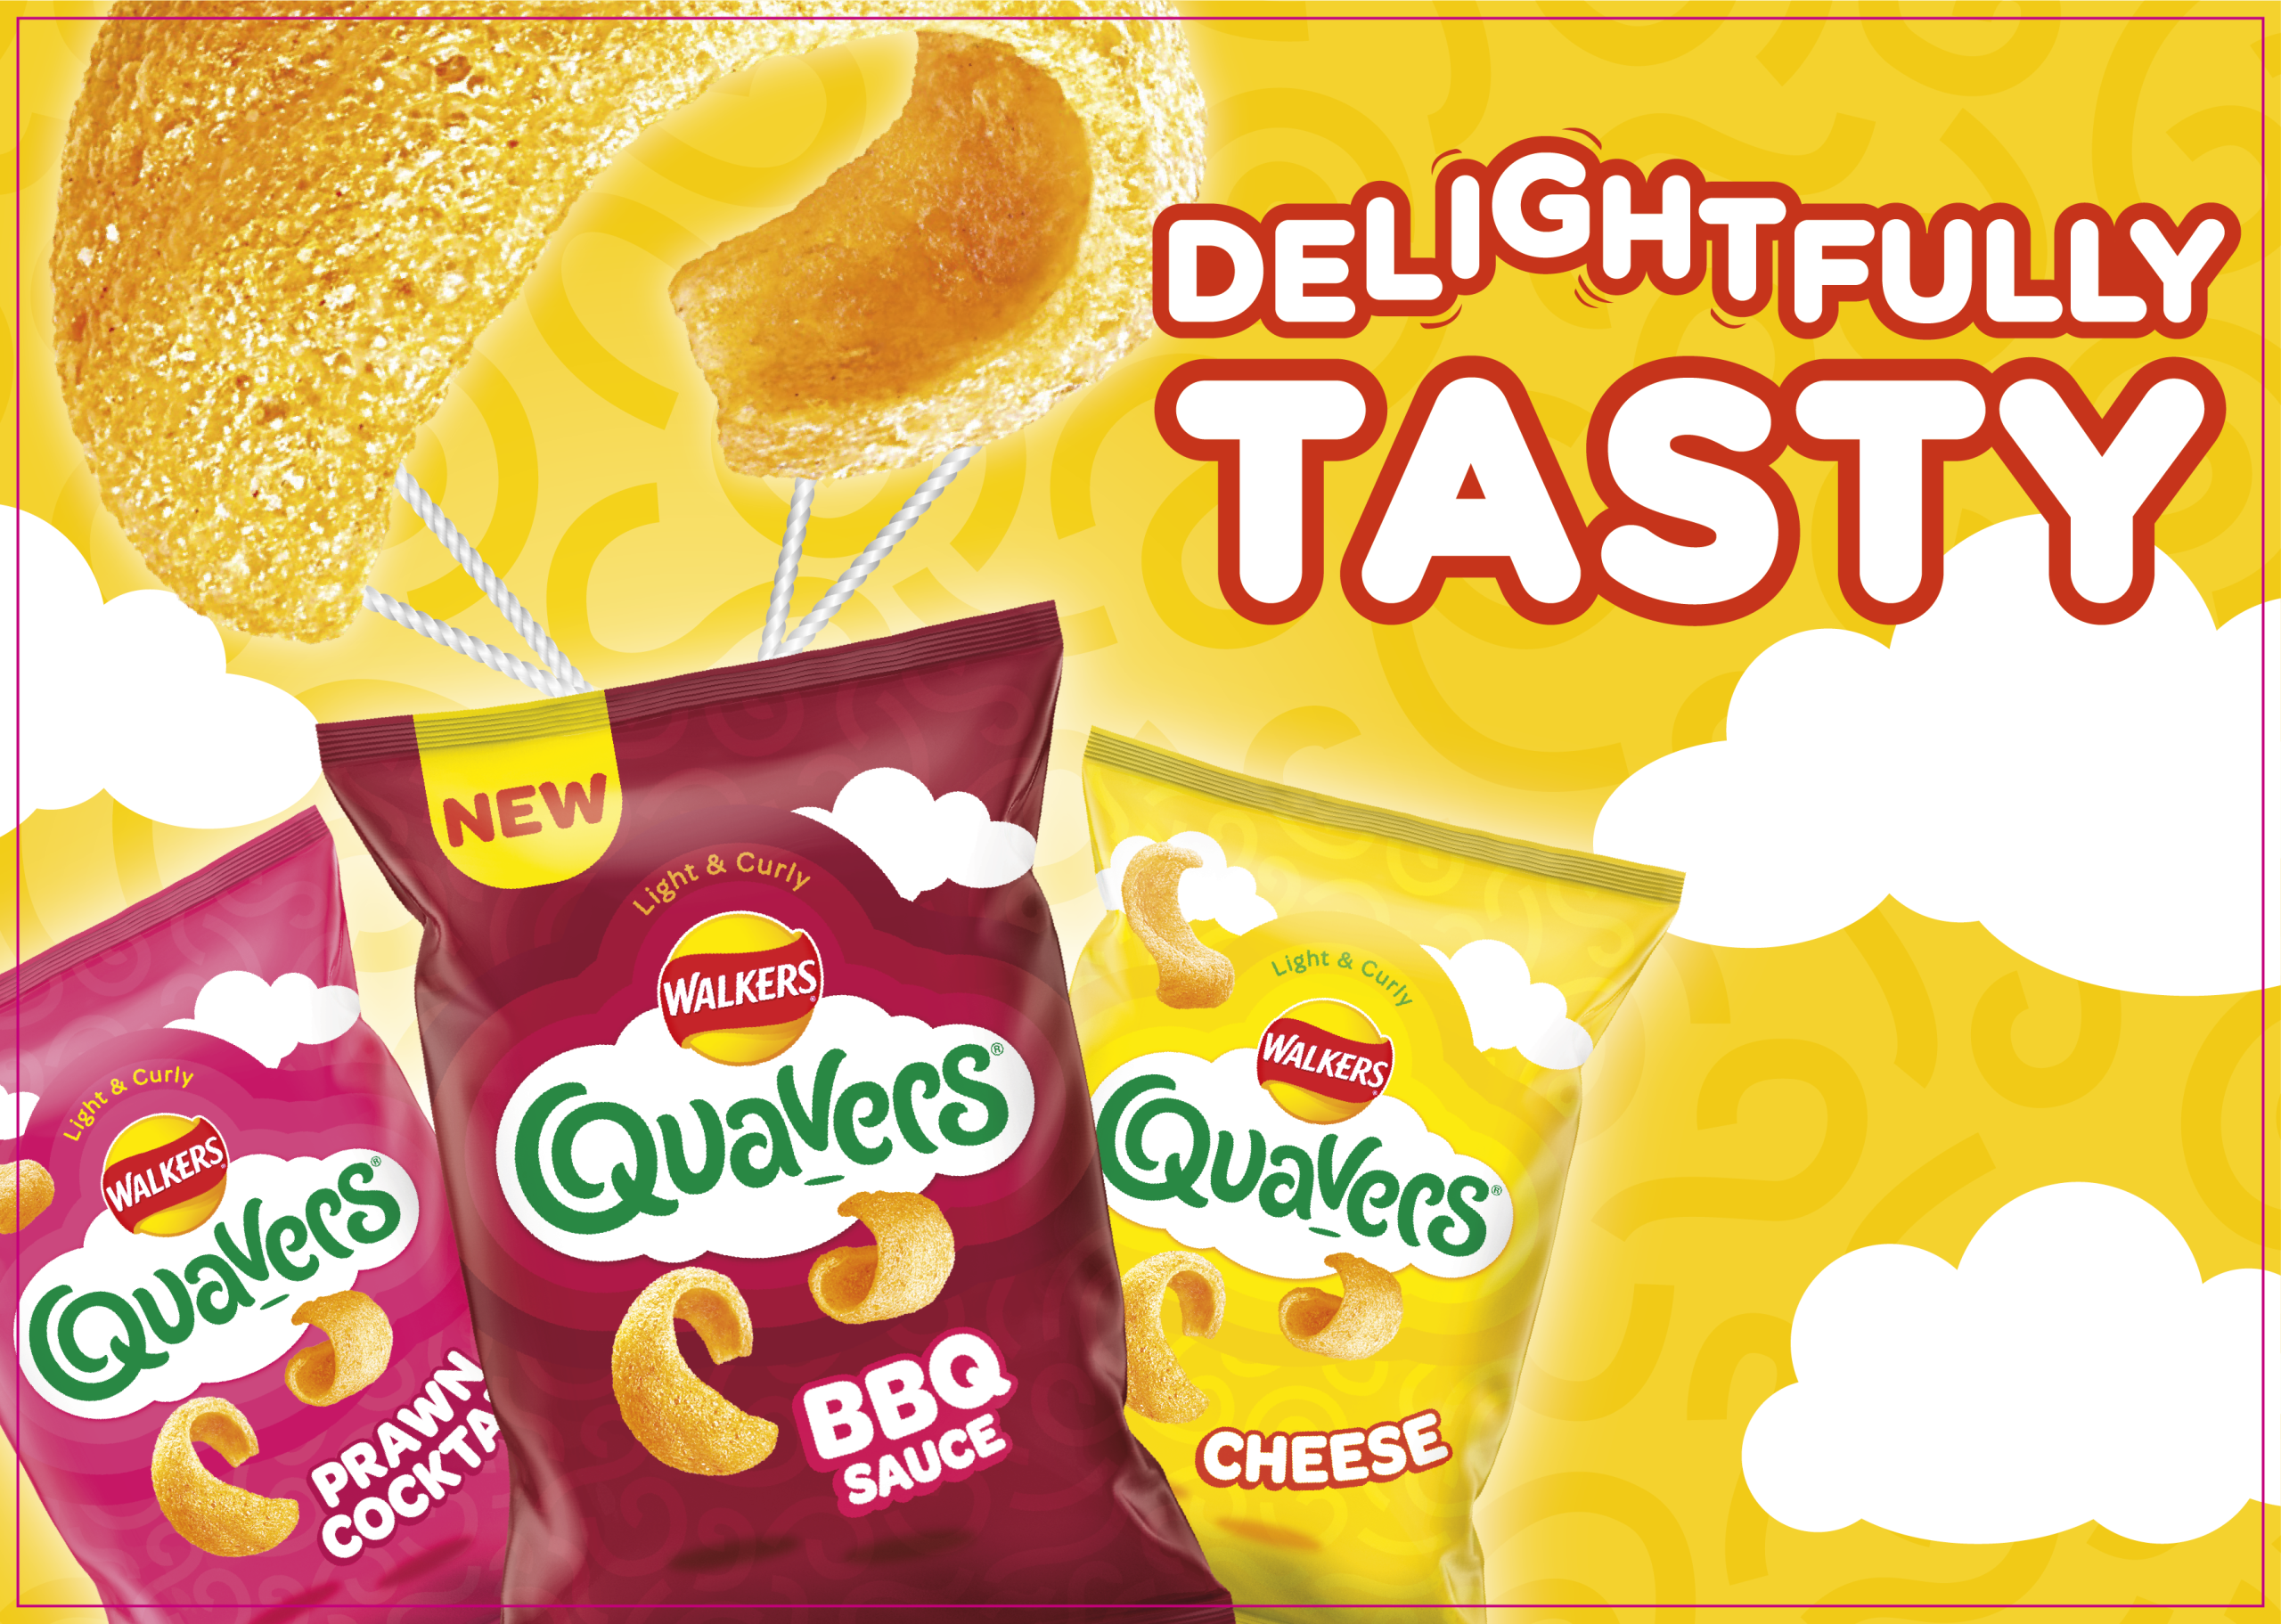 Quavers launches new BBQ Sauce flavour, unveils new look